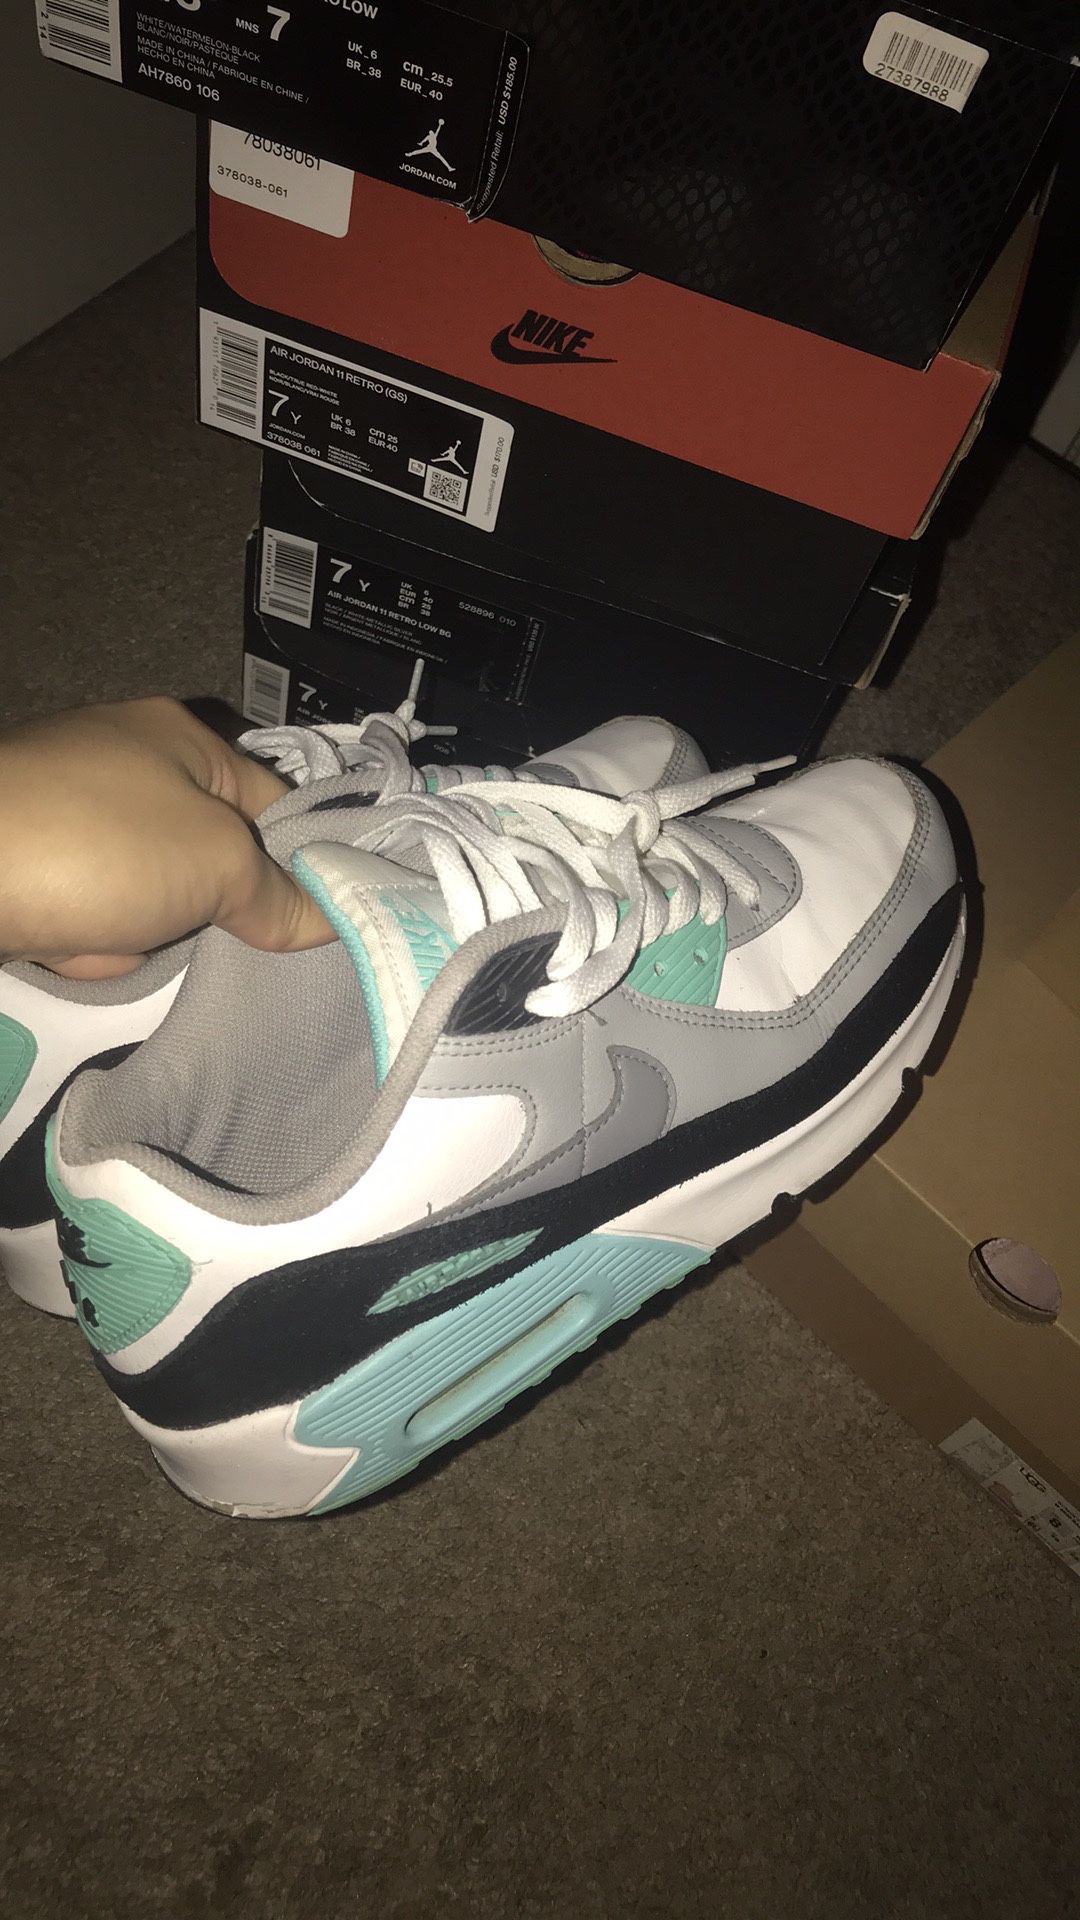 Air max hyper turquoise